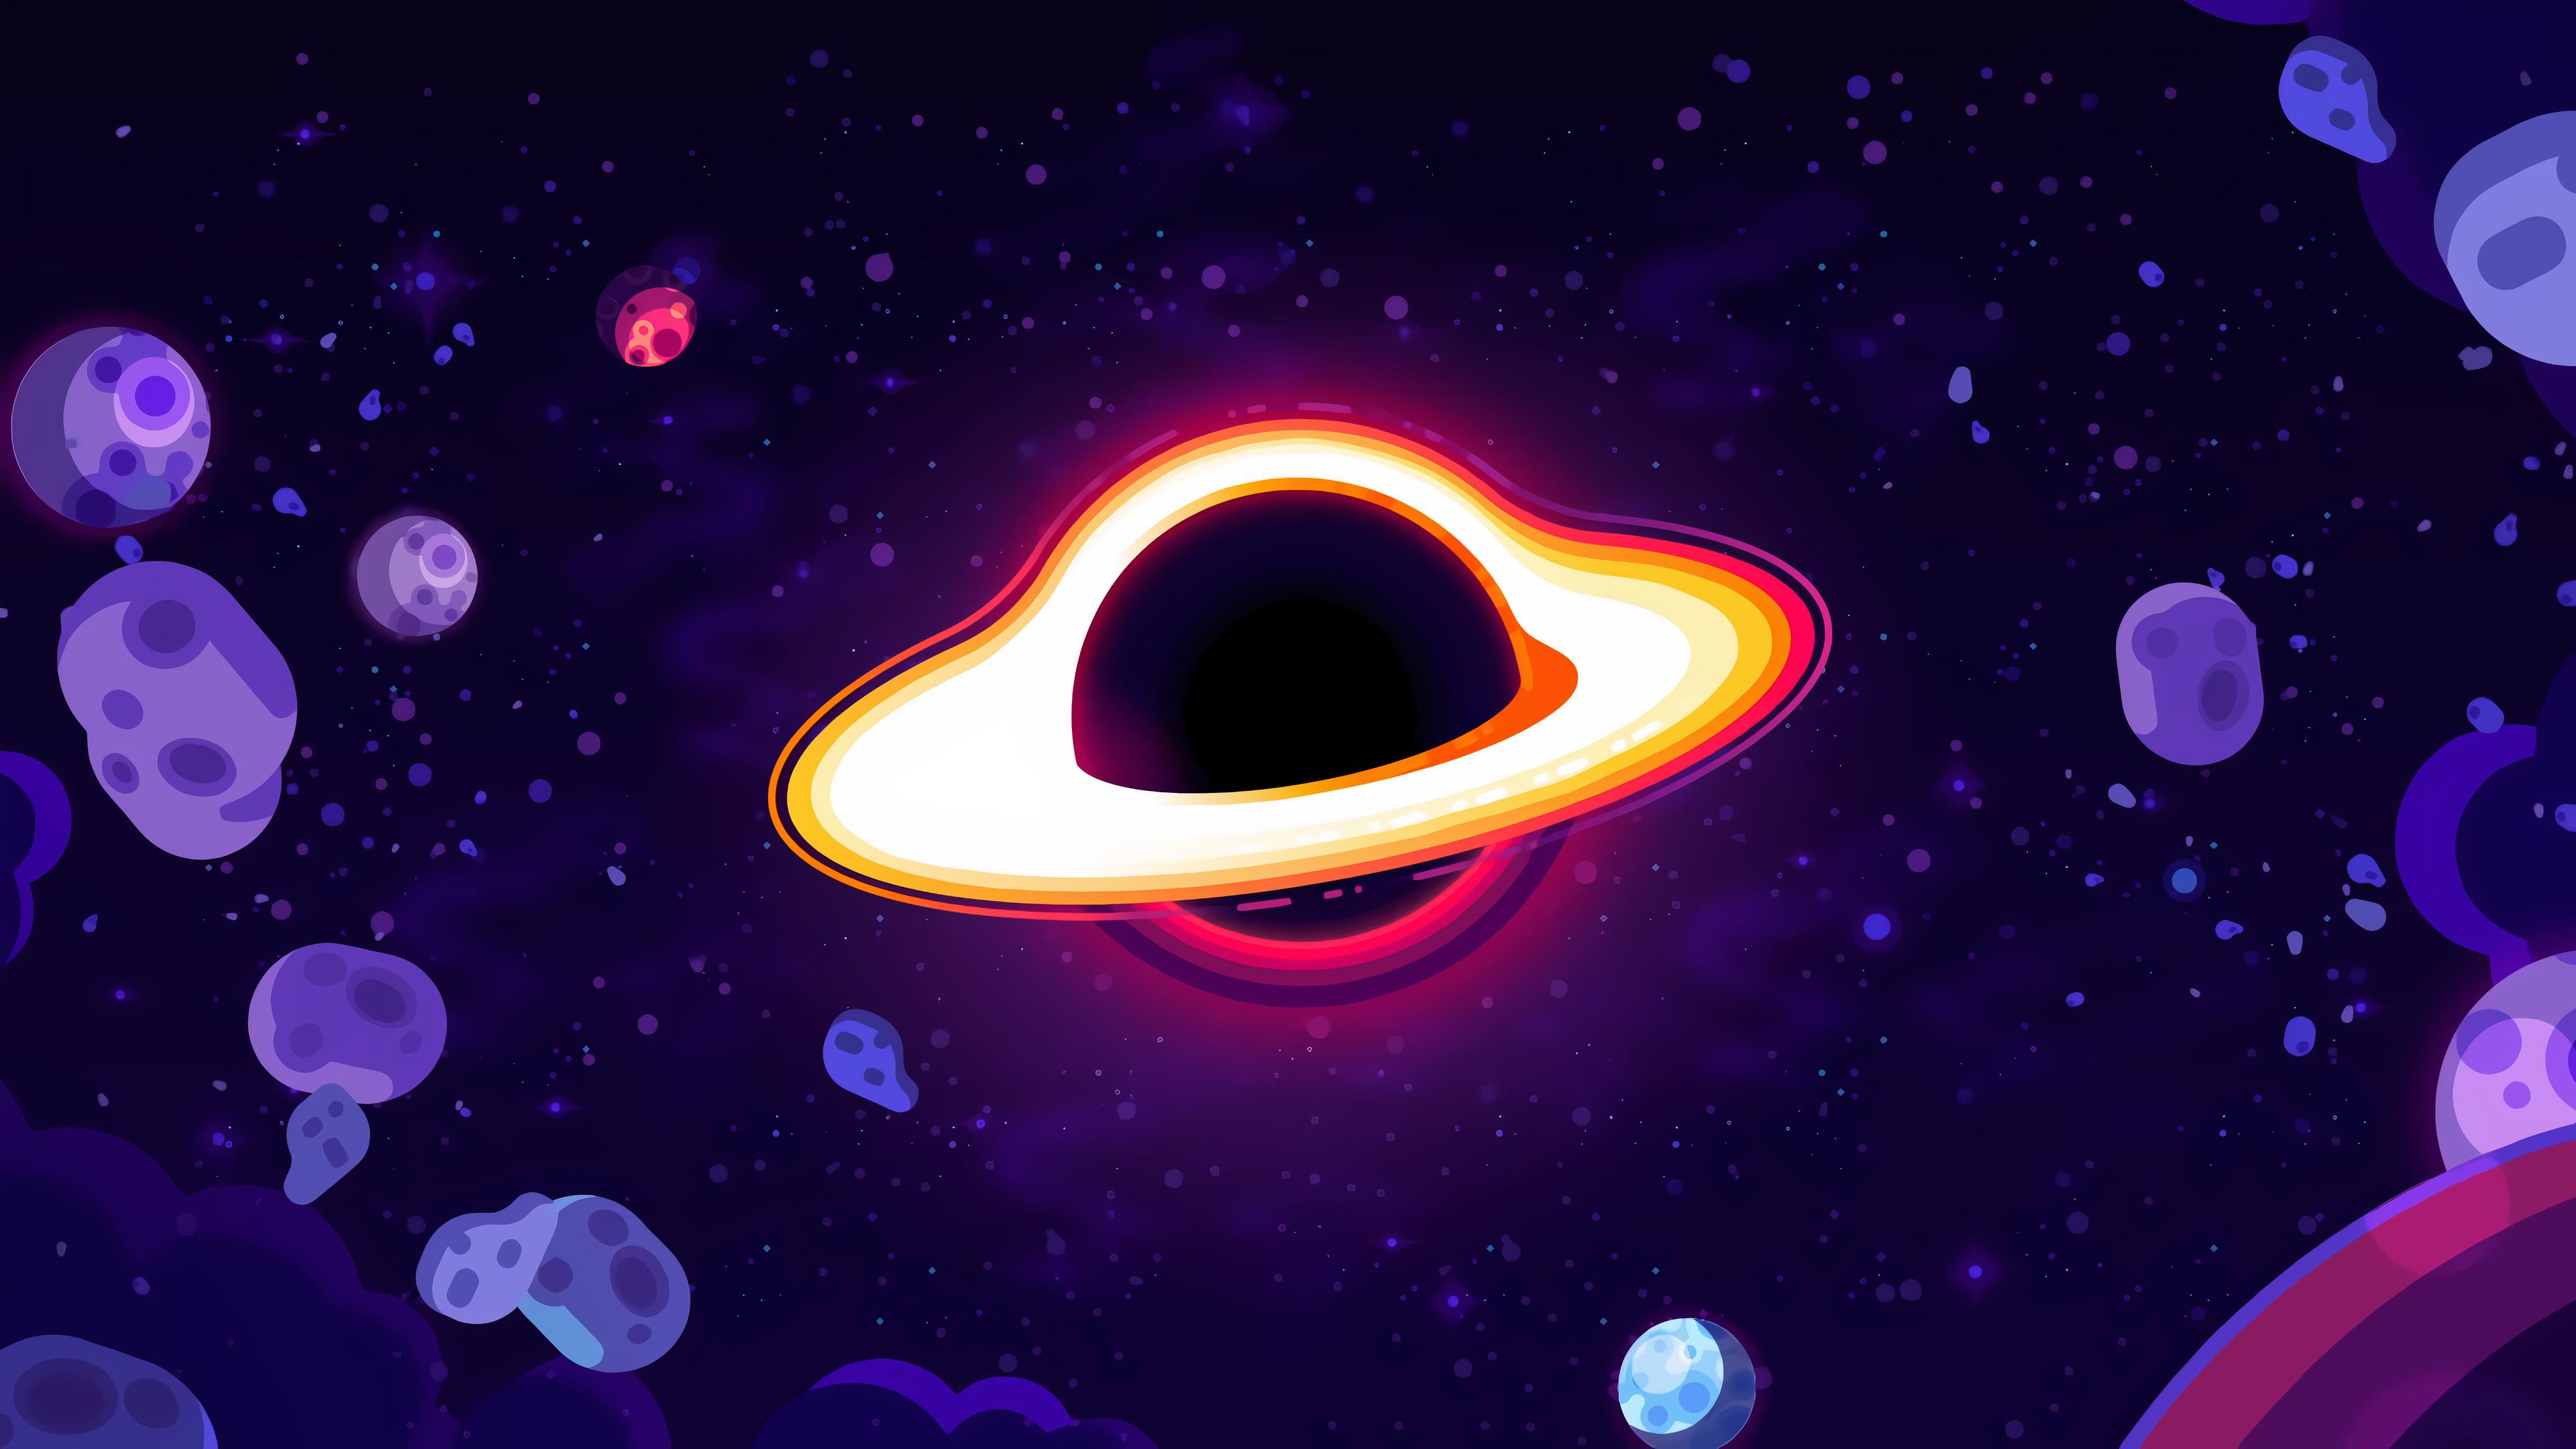 Space 4K wallpapers for your desktop or mobile screen free and easy to